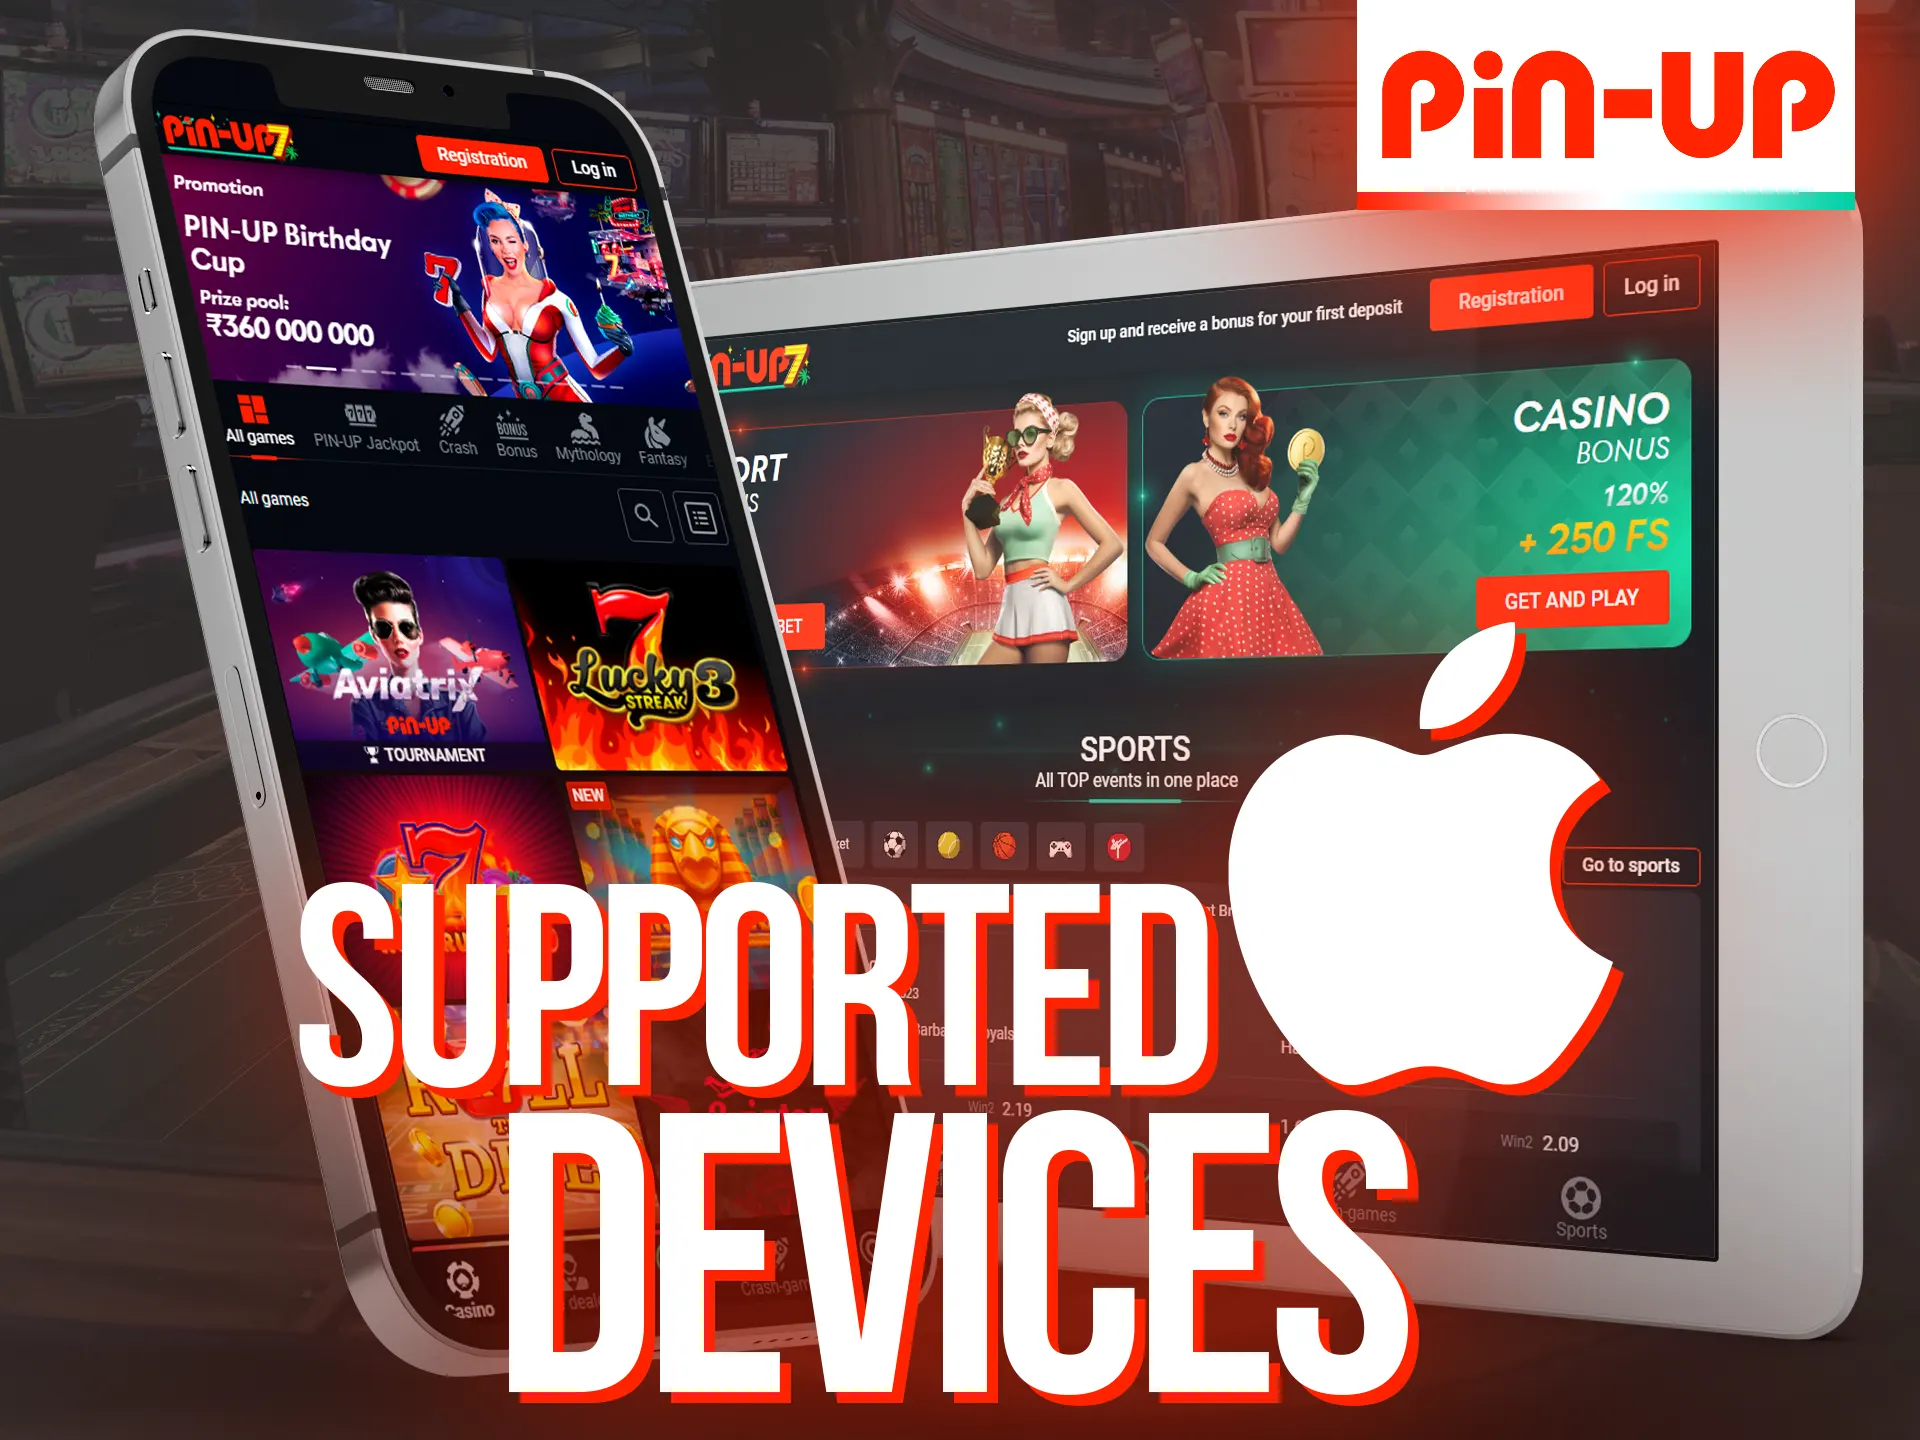 Play at Pin-Up online casino from your iOS device.